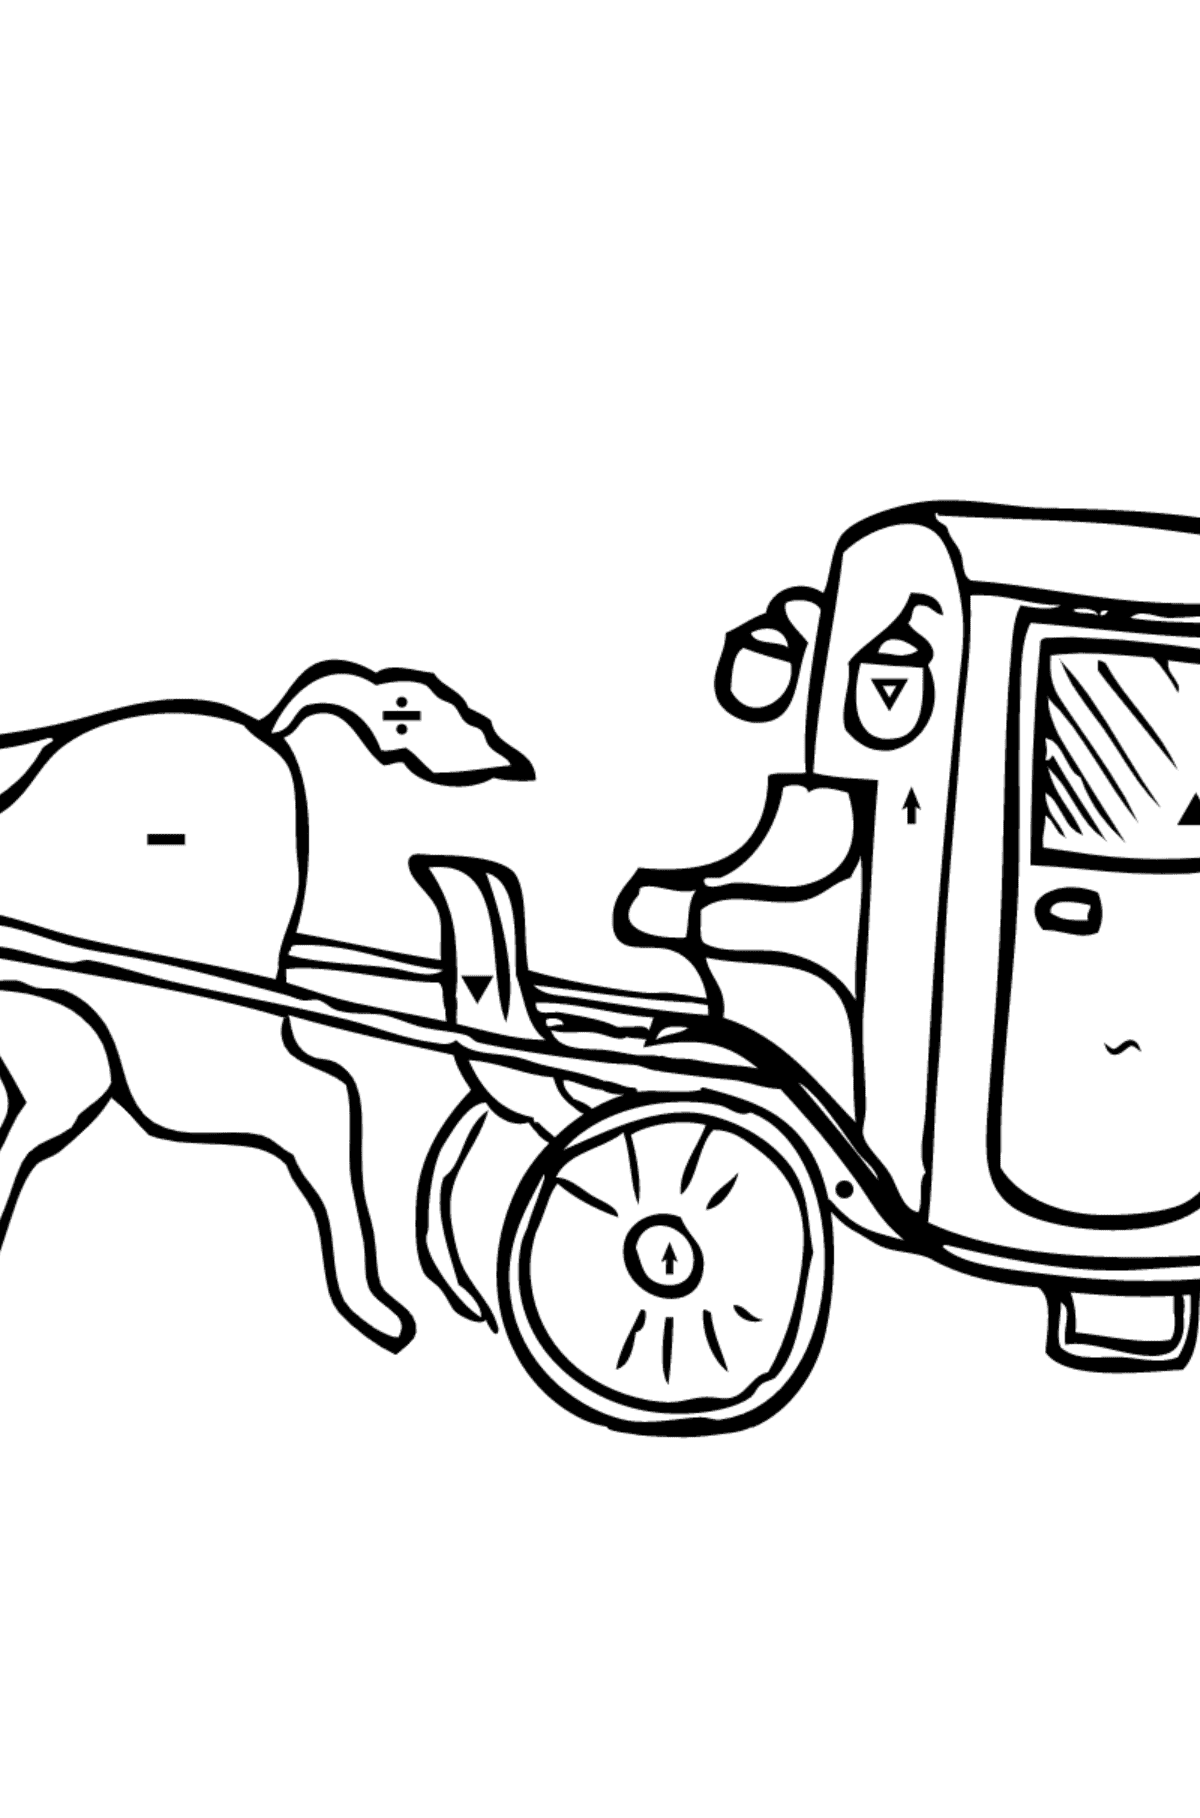 Coloring Page - A Cab - Coloring by Symbols for Children